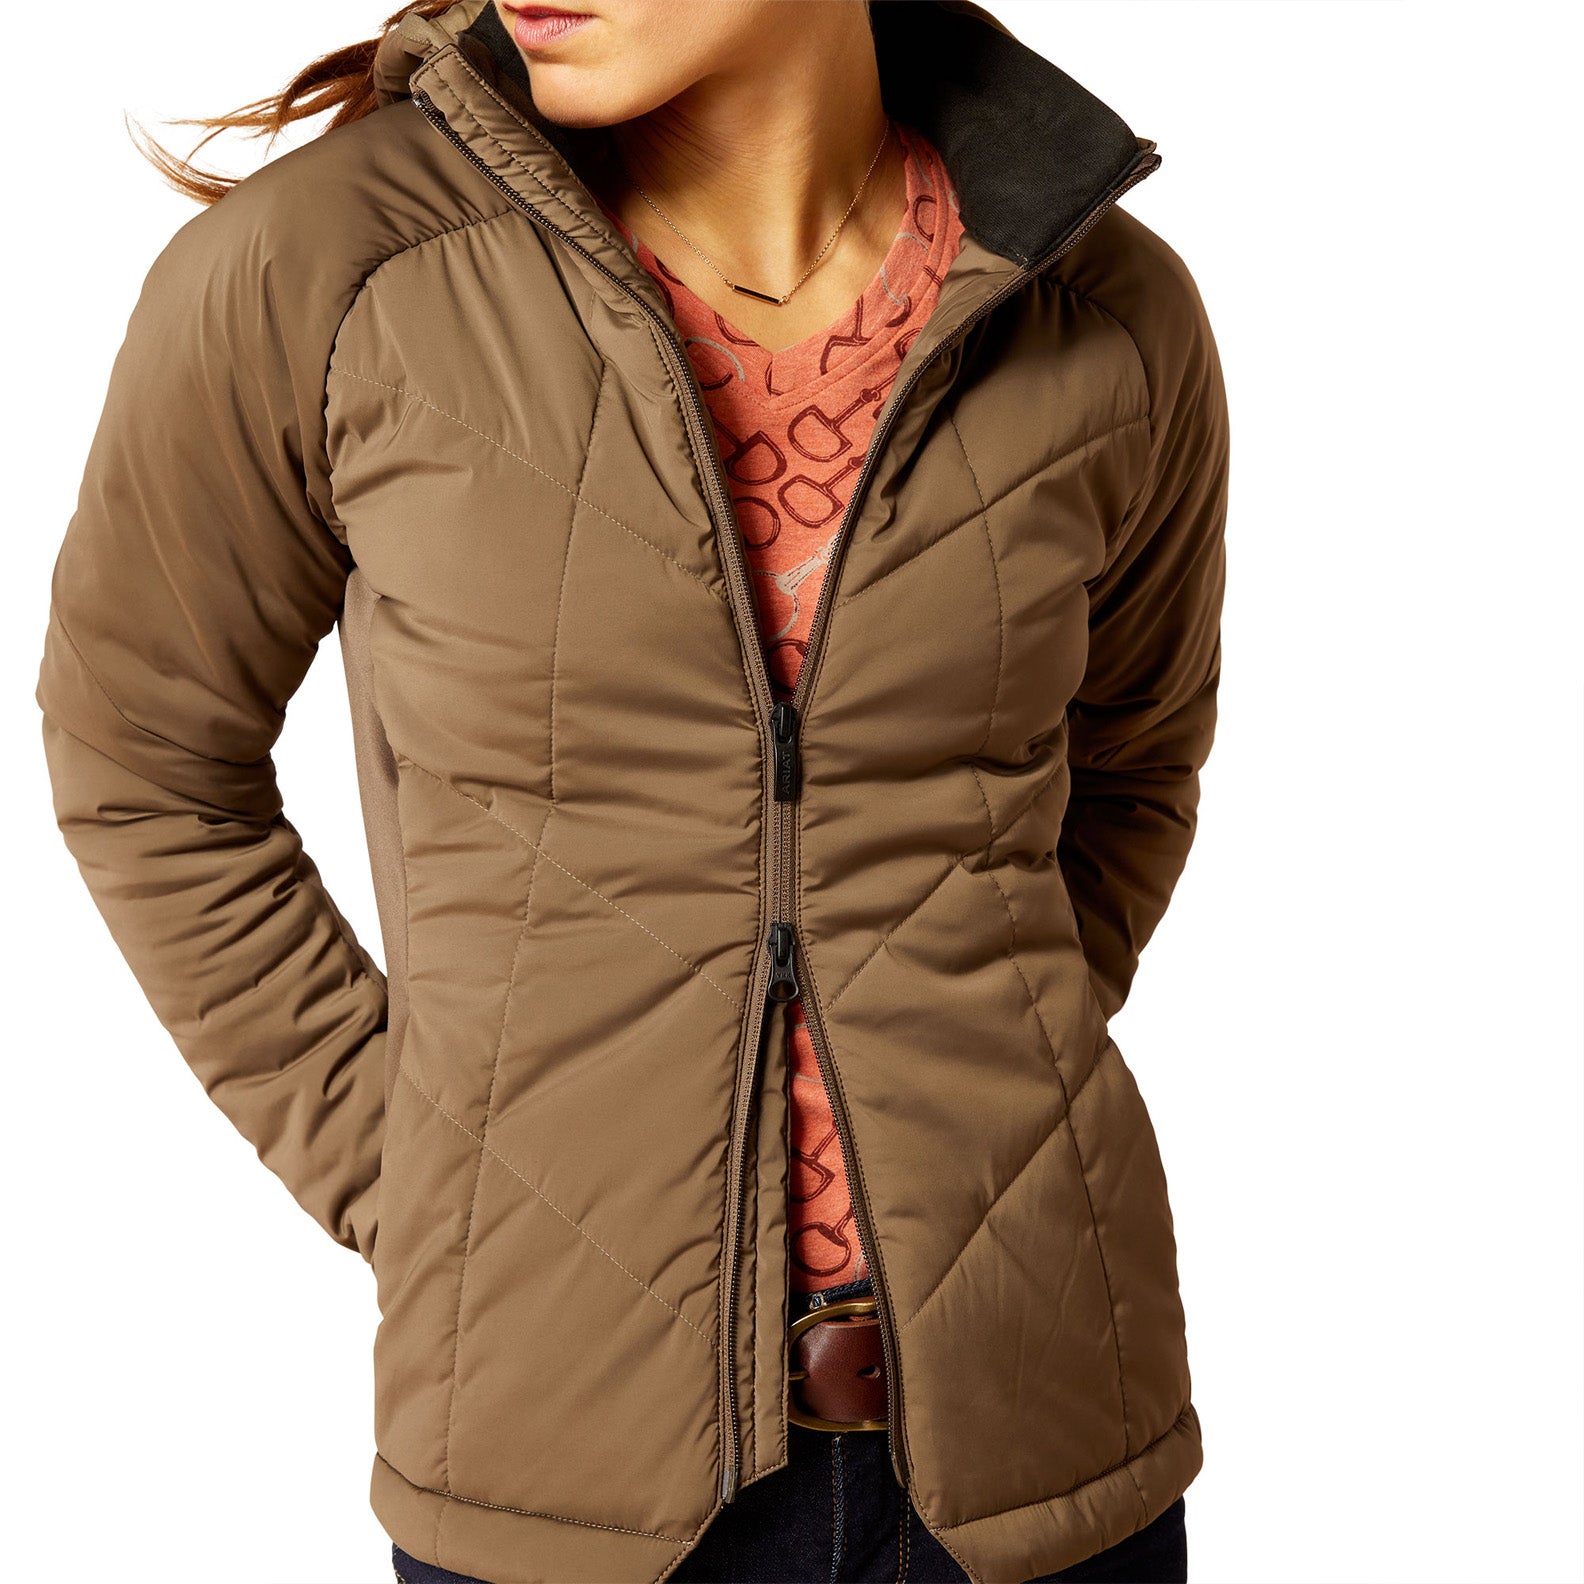 Ariat Zonal Insulated Jacket